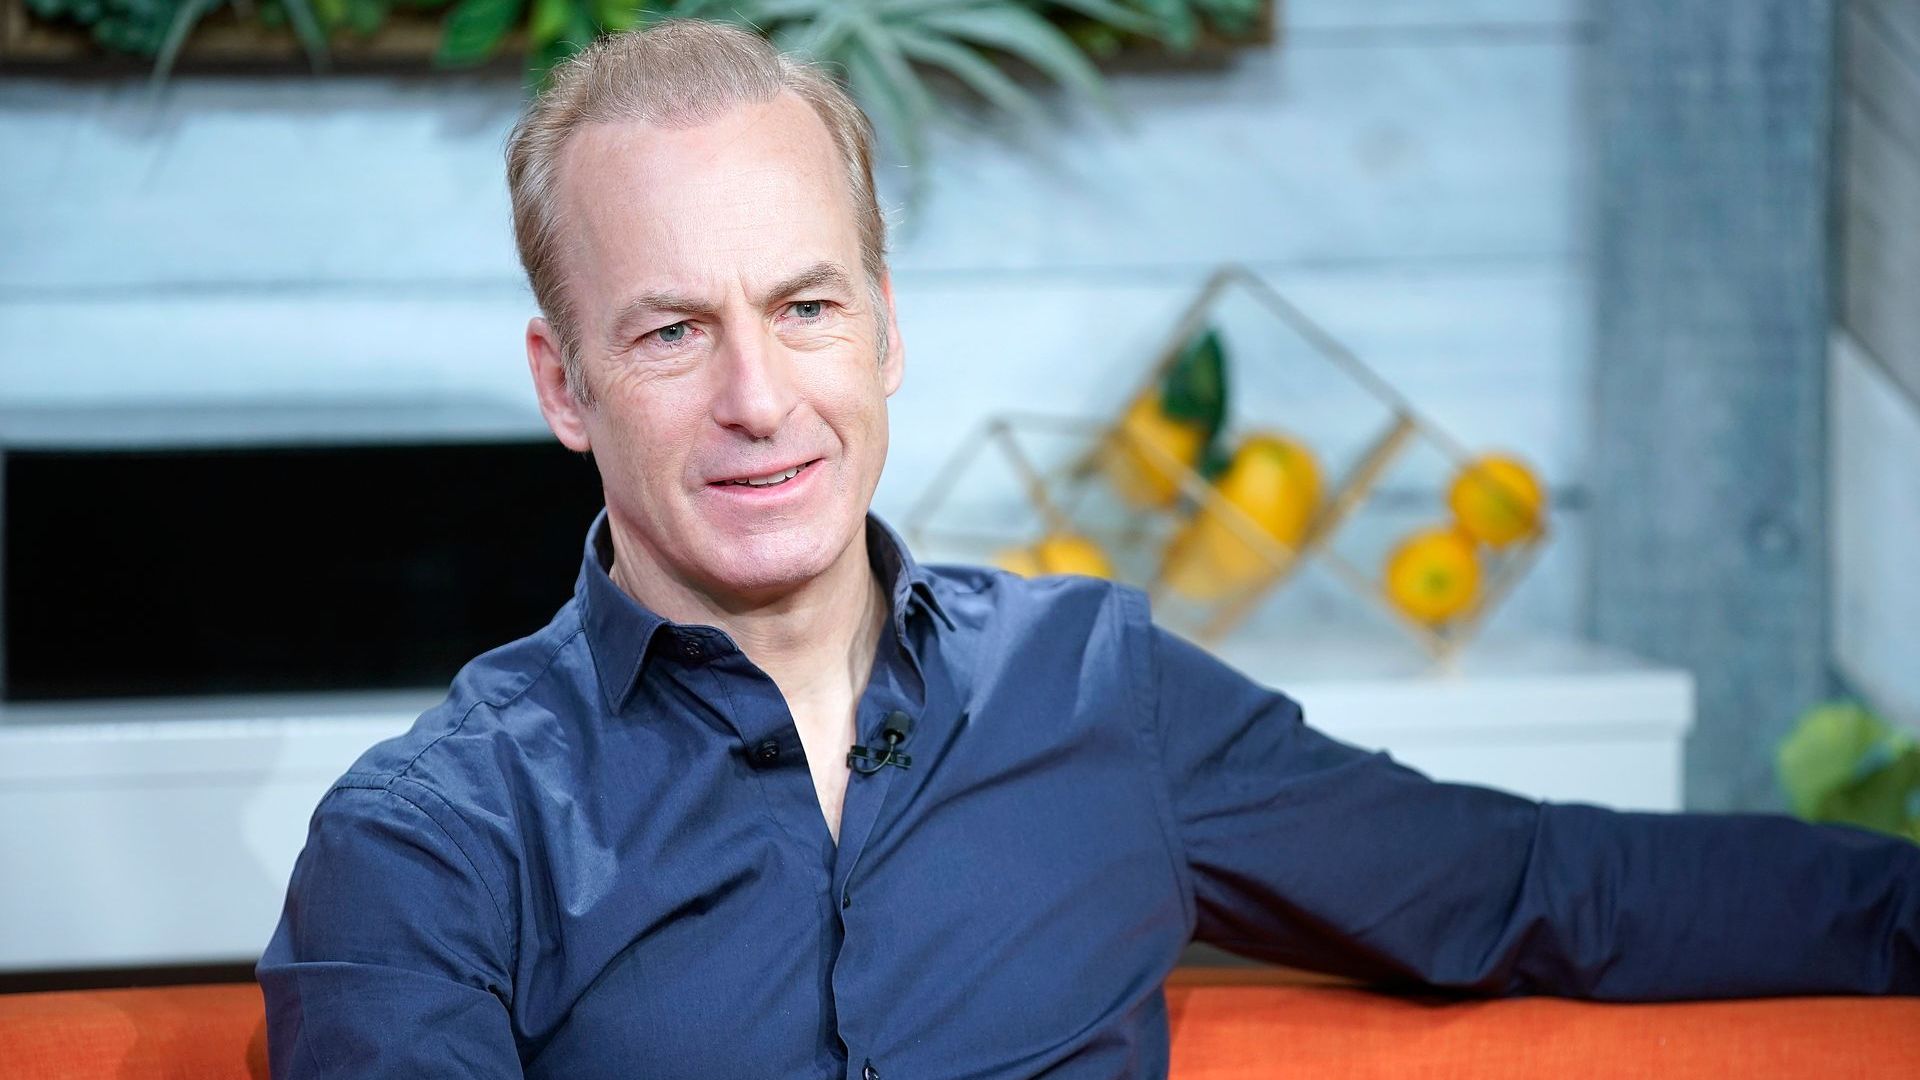 Bob Odenkirk Says He’s ‘Doing Great’ Following Heart Attack Hospitalization